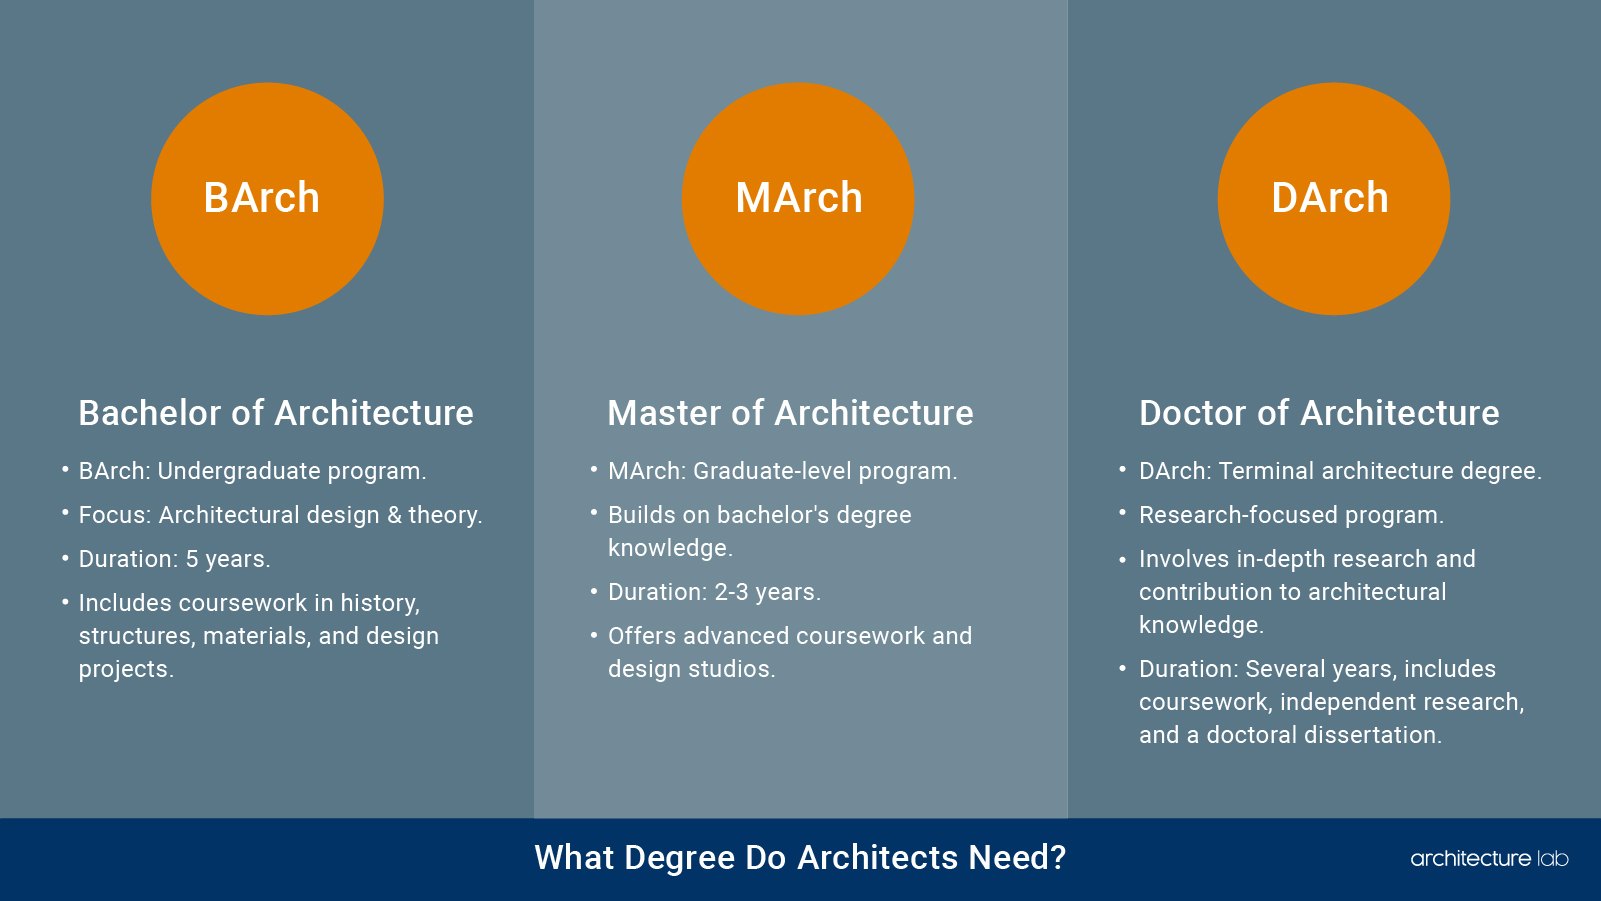 What degree do architects need?